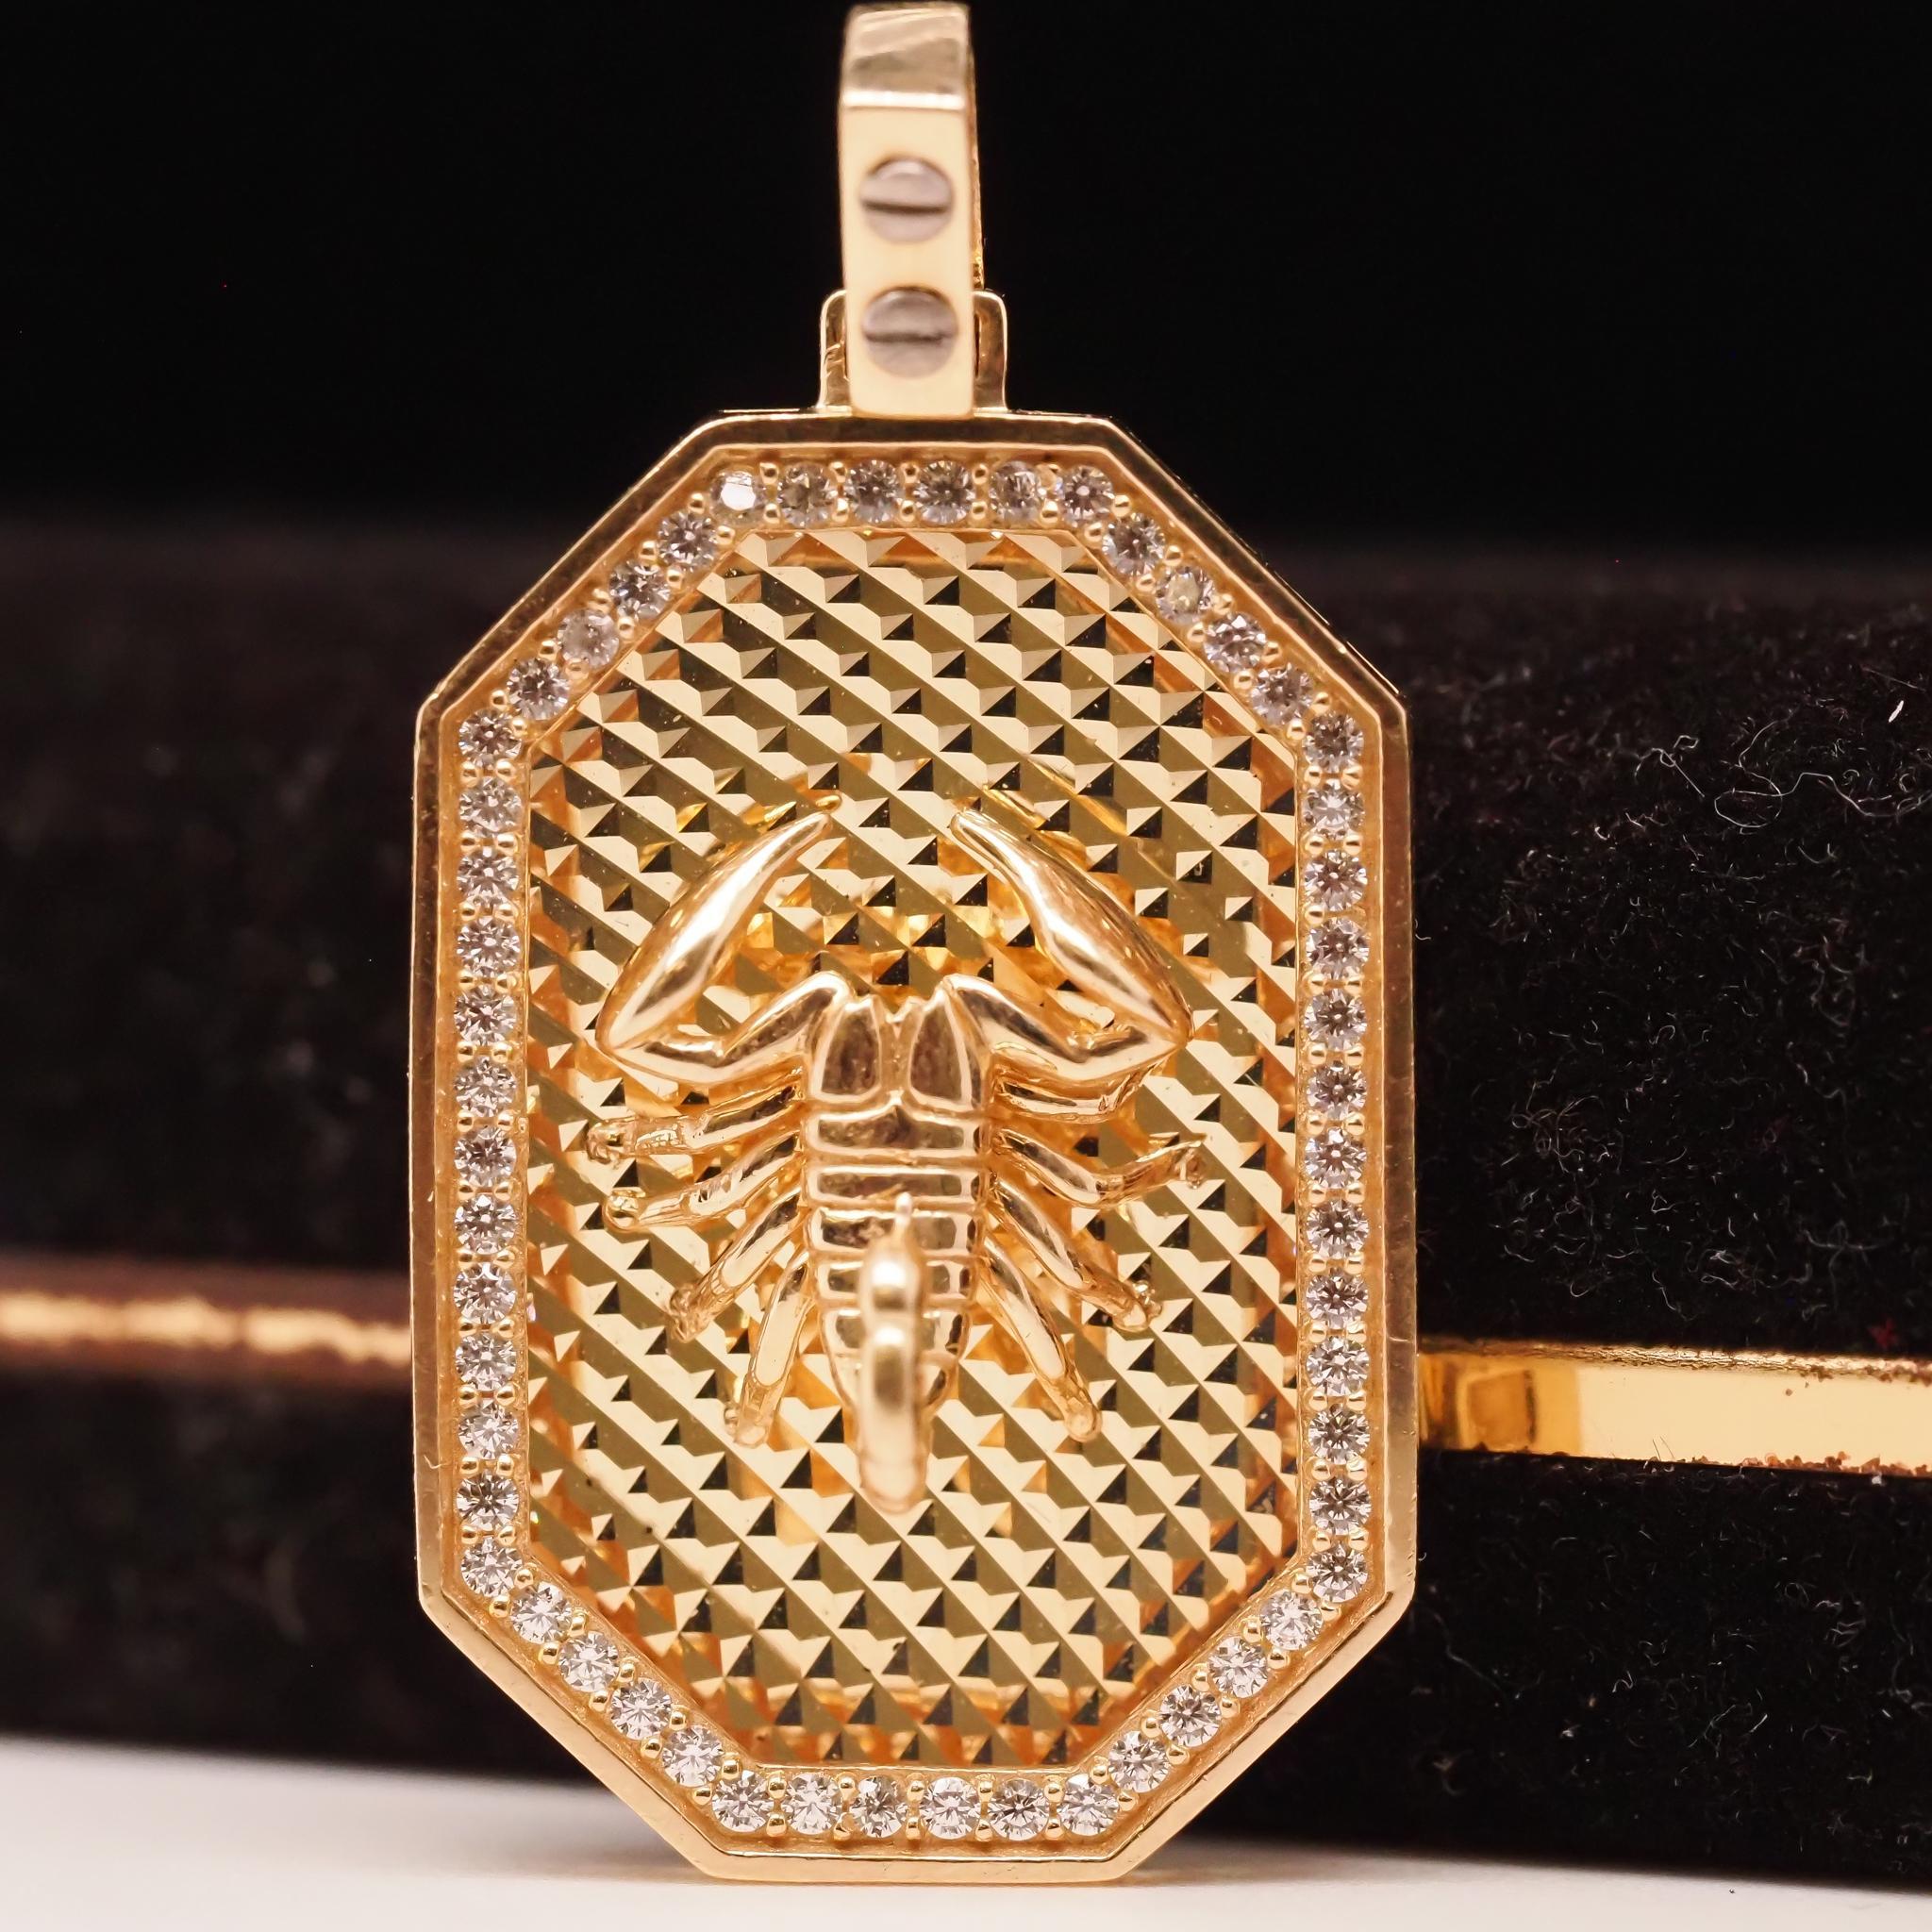 Year: 2000s
Item Details:
Metal Type: 14K Yellow Gold [Hallmarked, and Tested]
Weight: 8.8 grams
Diamond Details: .25ct, G Color, VS Clarity
Measurement: 1.6 inch long
Condition: Excellent